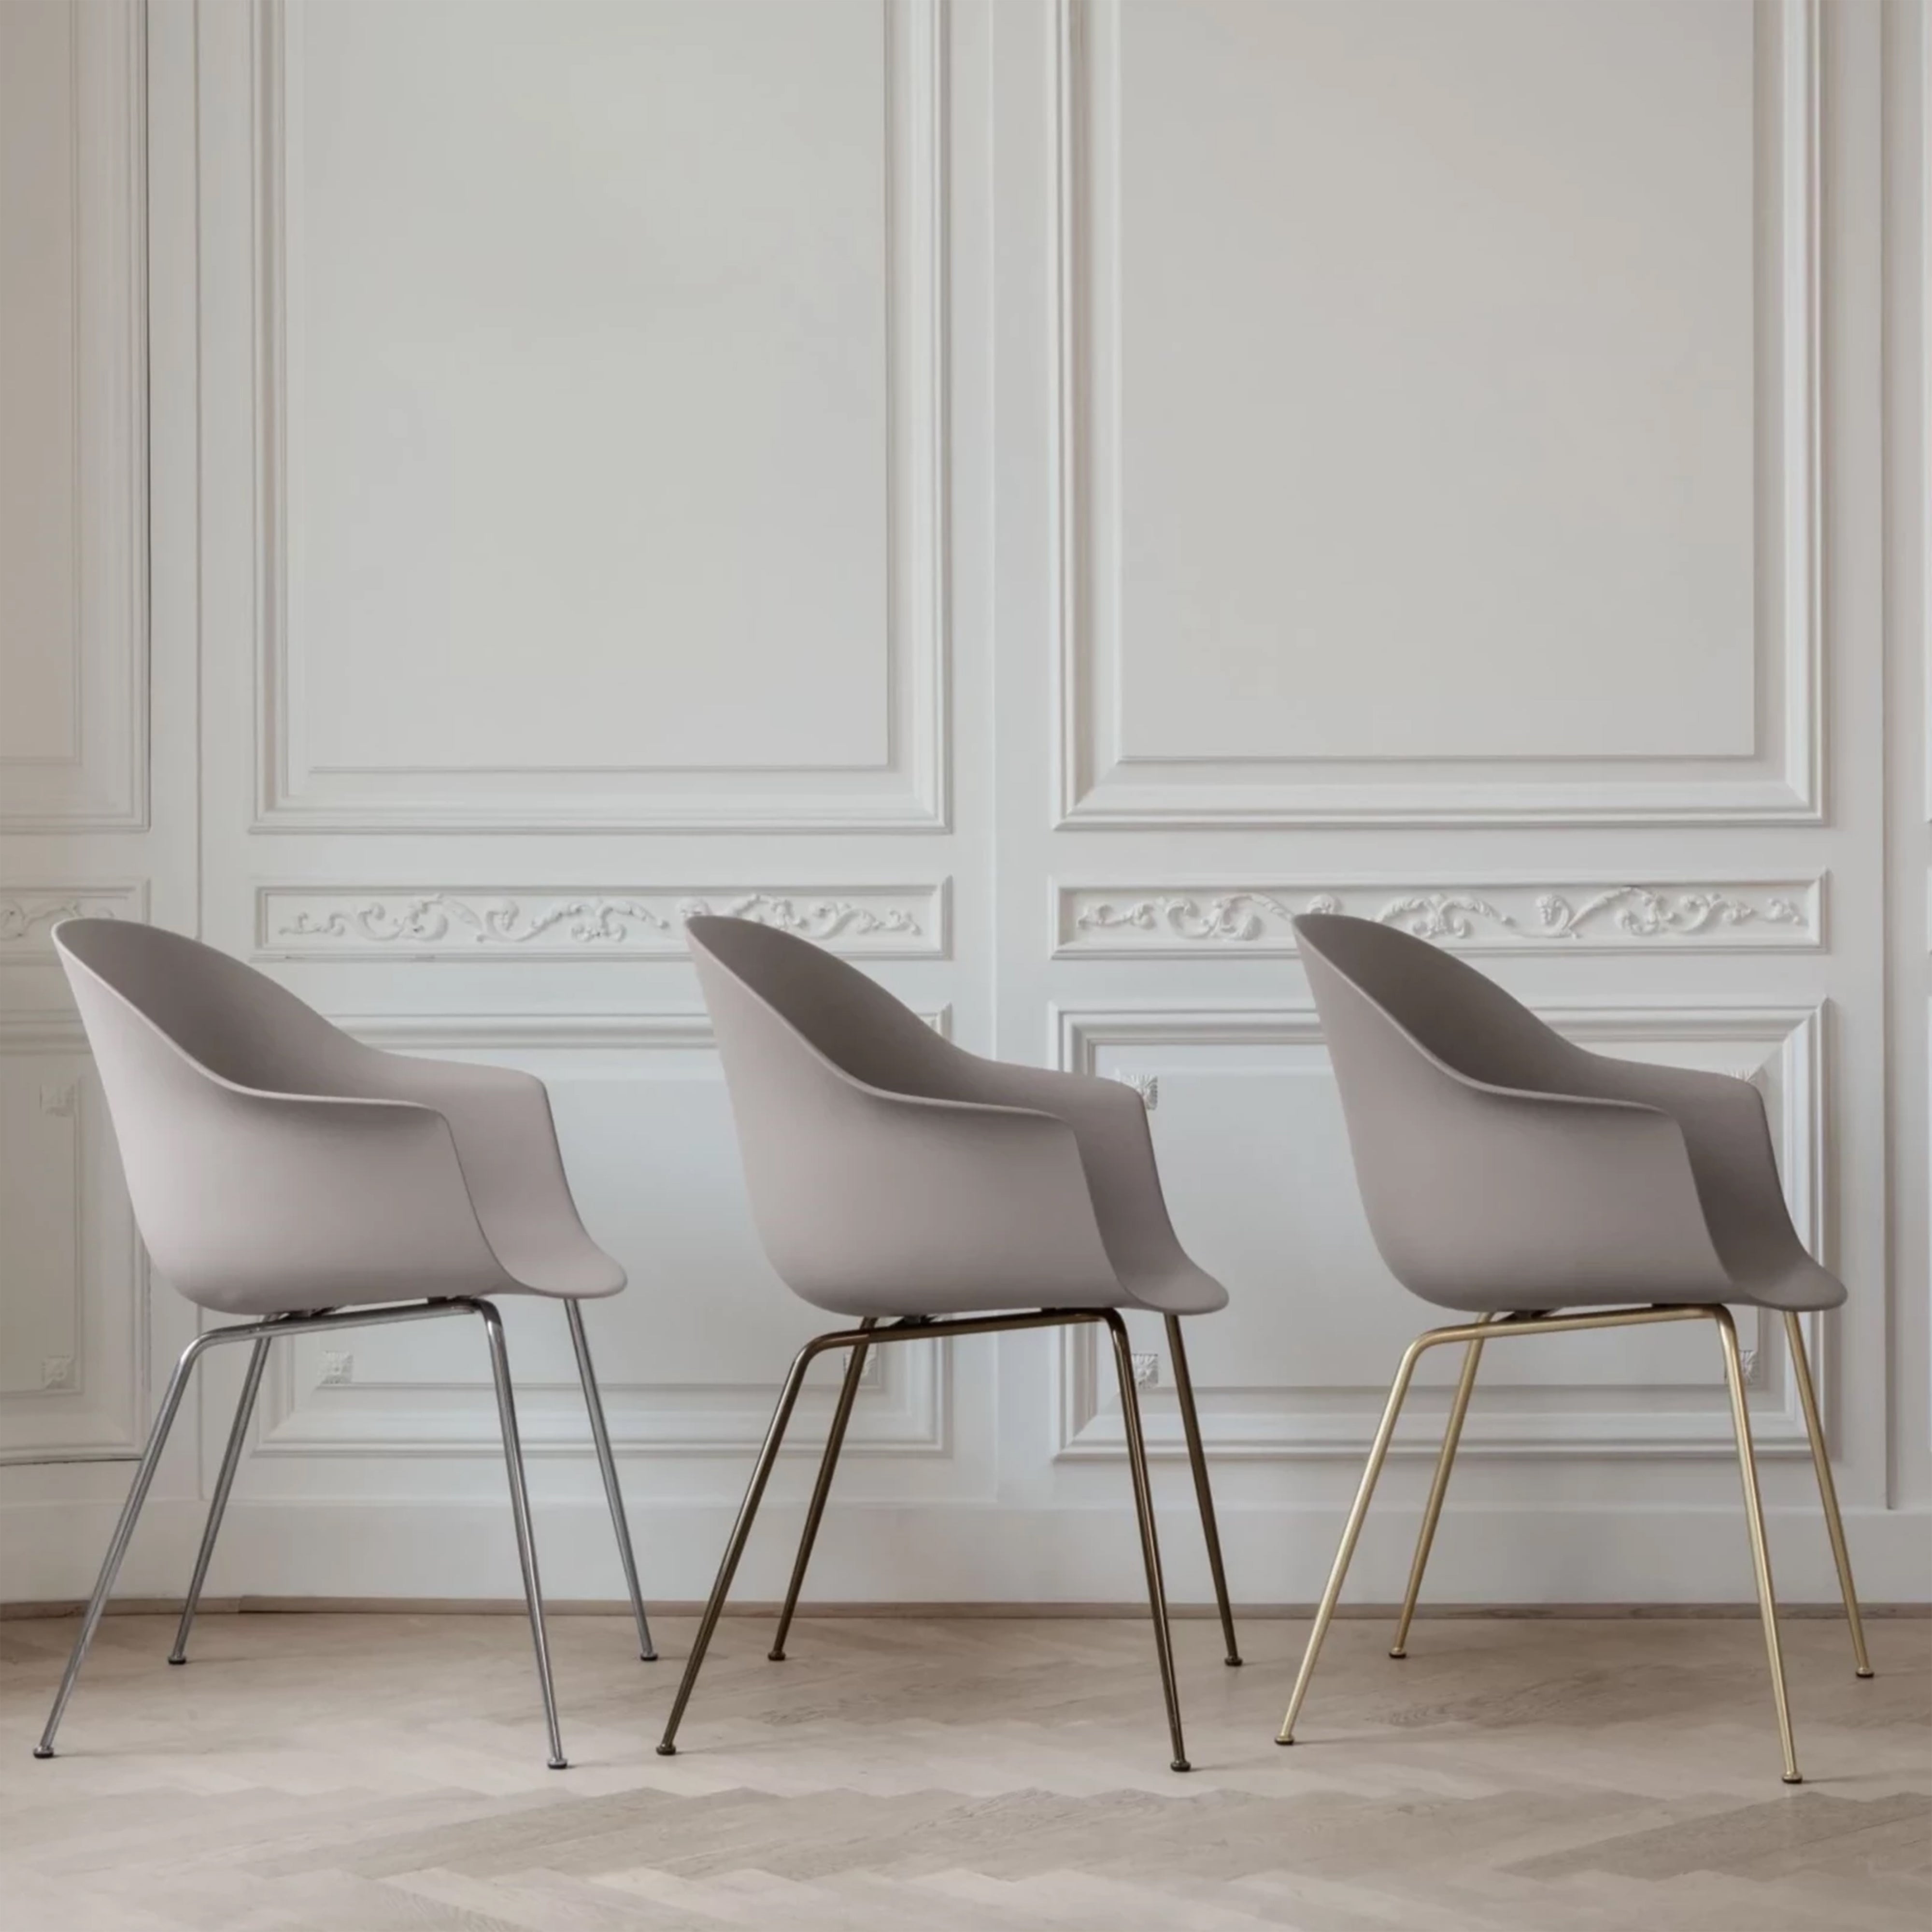 Bat Dining Chair: Conic Base